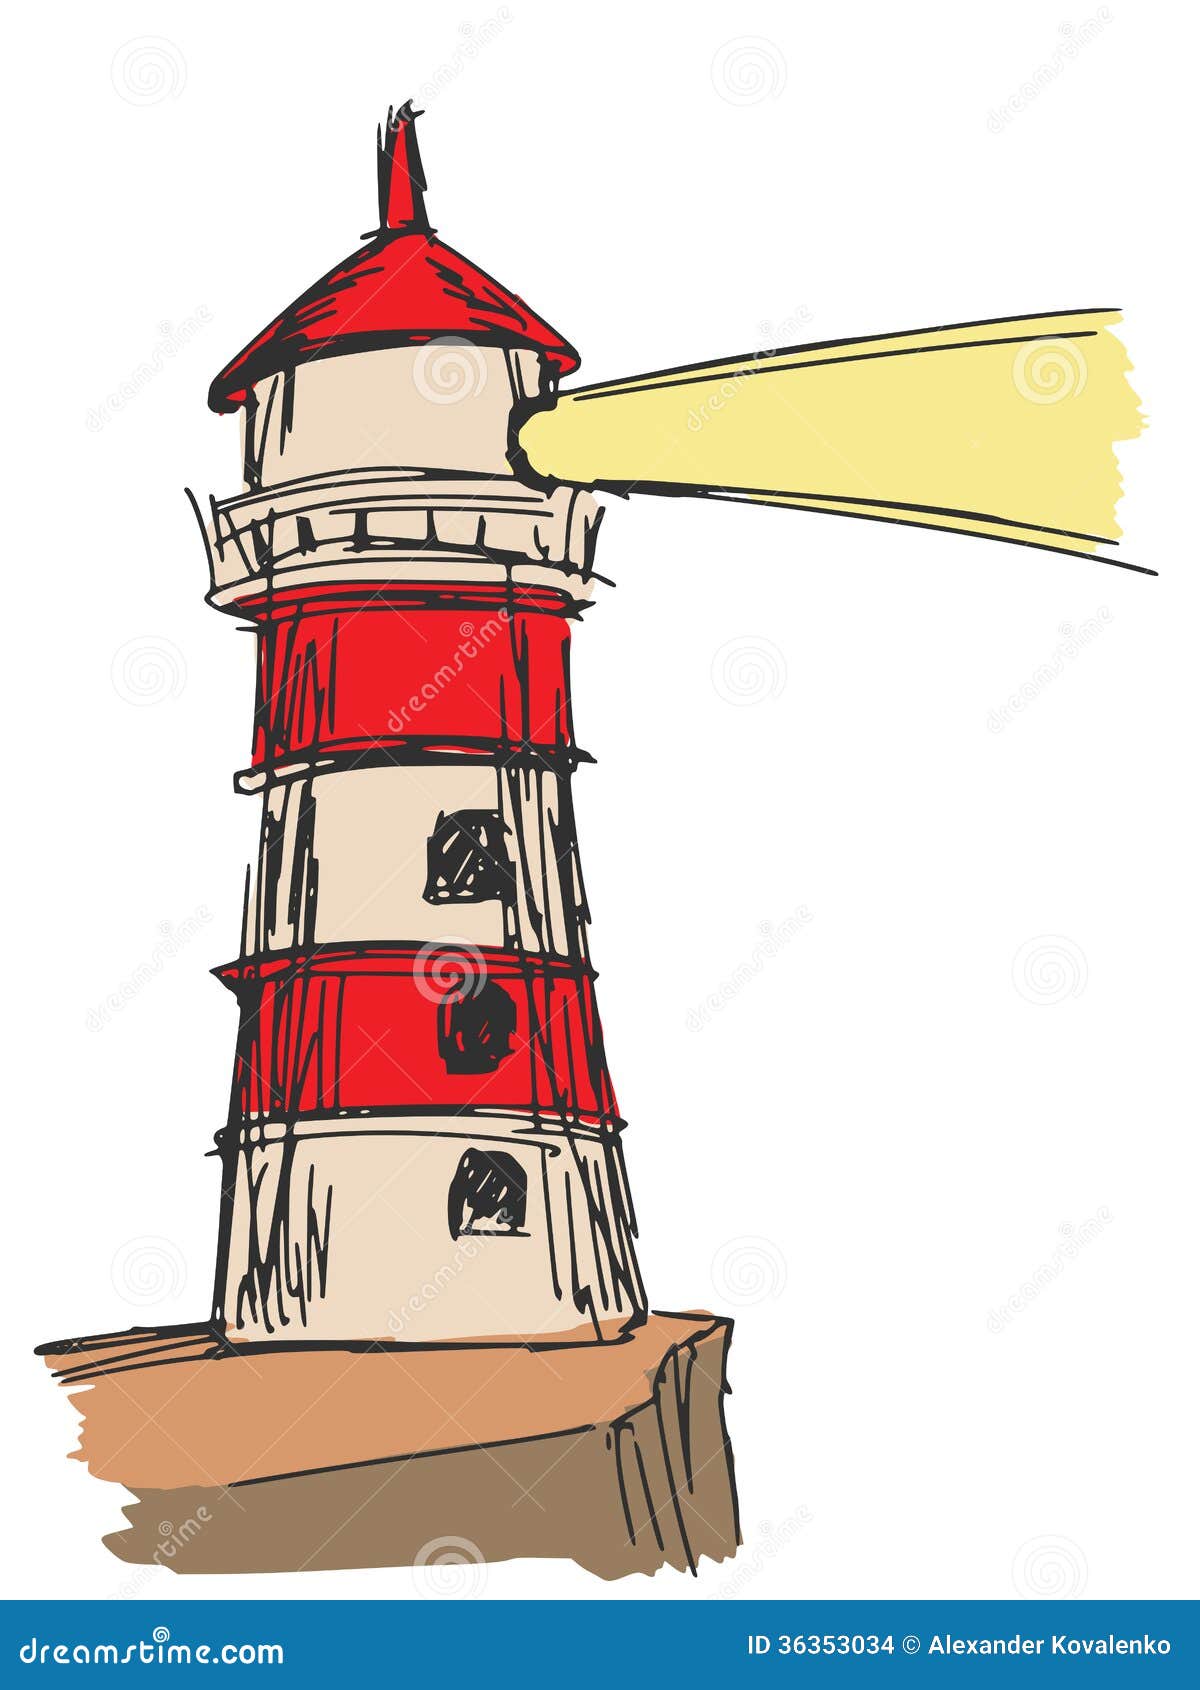 Lighthouse stock vector. Image of architecture, cartoon 